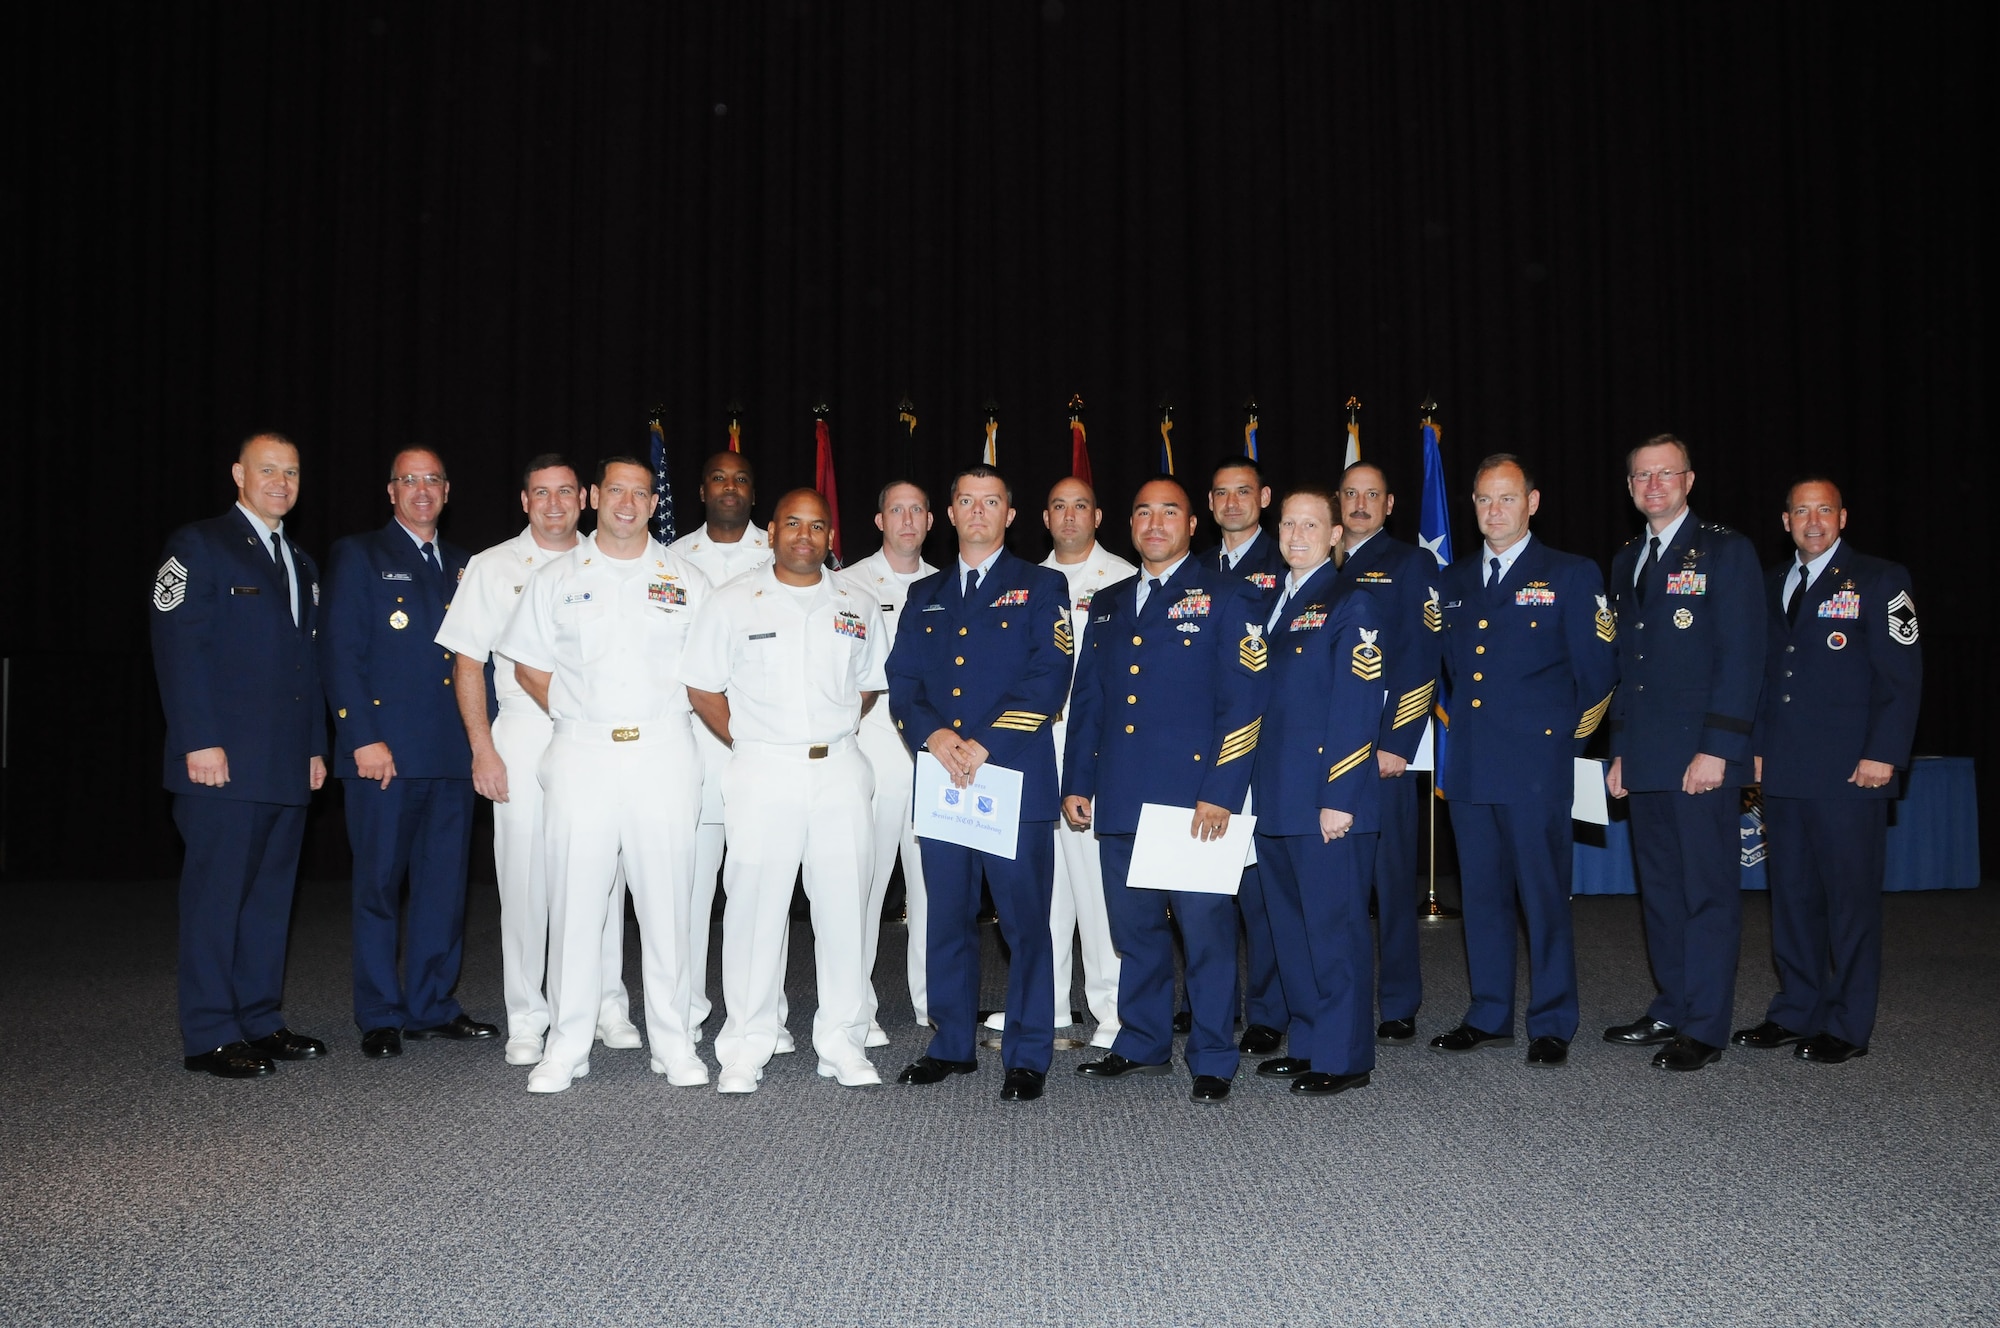 From left, Chief Master Sergeant of the Air Force James Roy is joined by his counterpart, Master Chief Petty Officer of the Coast Guard Michael Leavitt with graduates of the Air Force Senior NCO Academy Tuesday. Featured second from right is Lt. Gen. David Fadok, commander and president of the Air University. Air Force photo by Bud Hancock